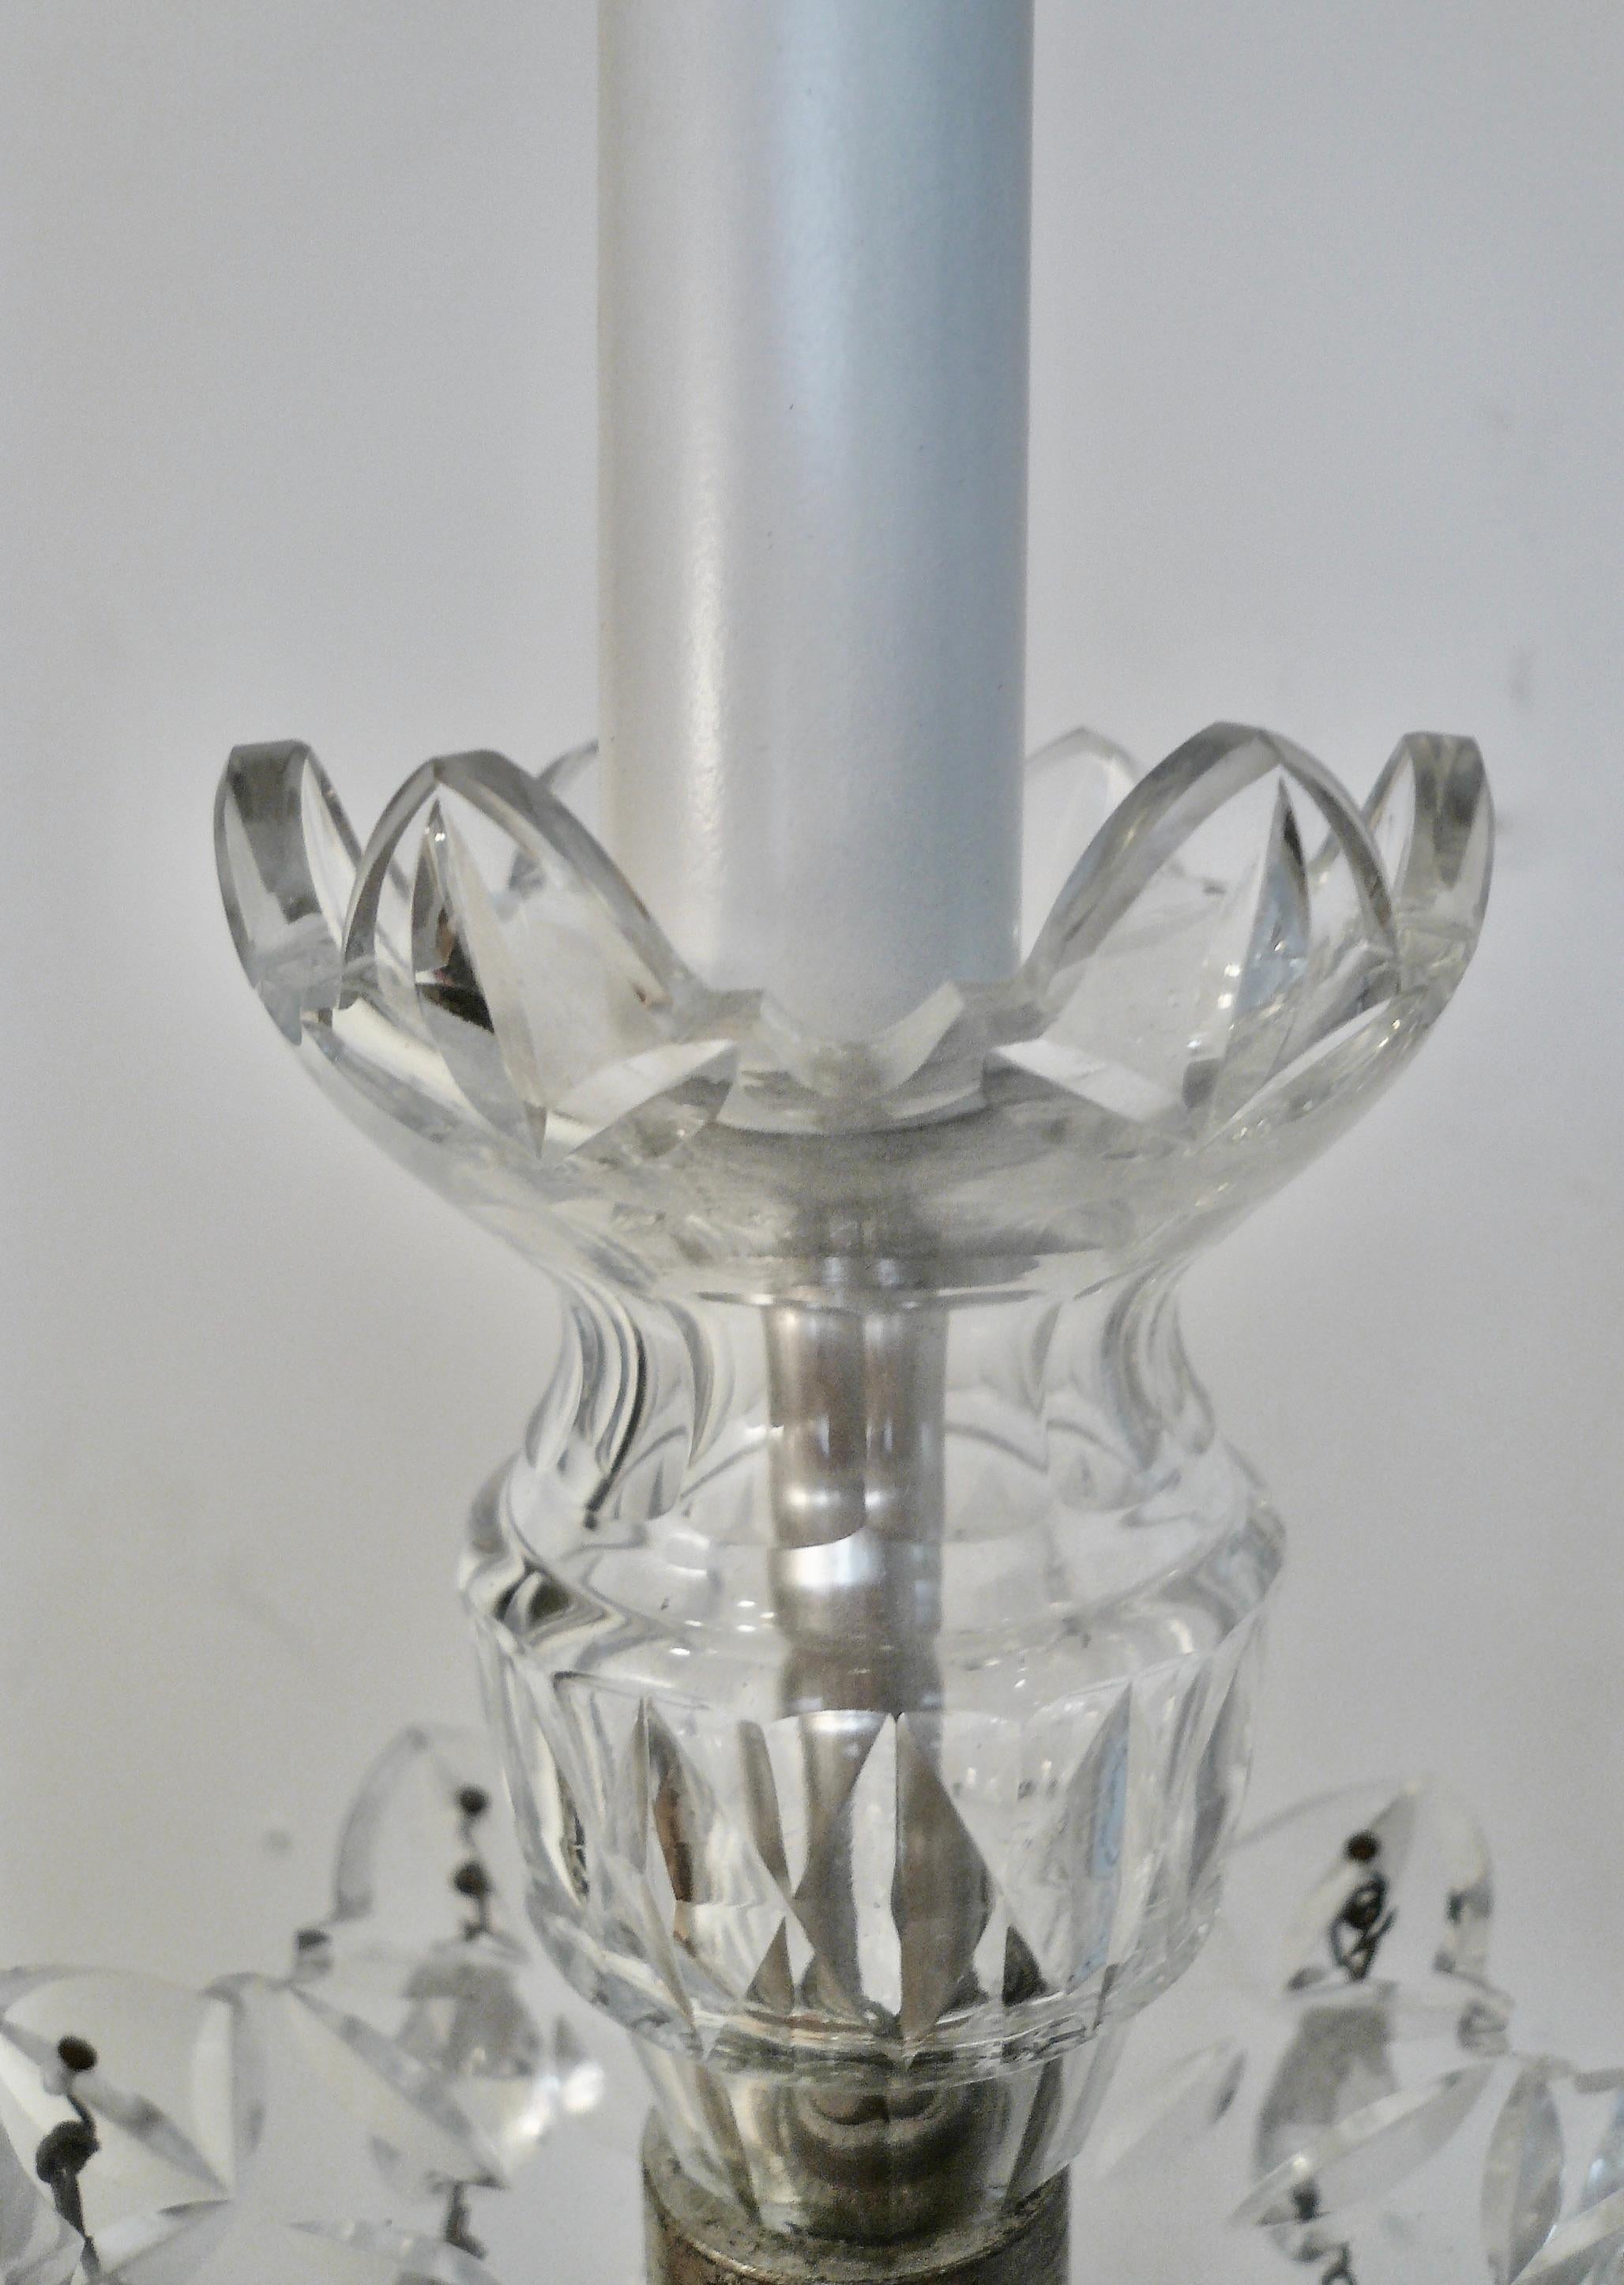 A Grand Scale Pair Cut Crystal Georgian Design Sconces in the Waterford Style For Sale 4